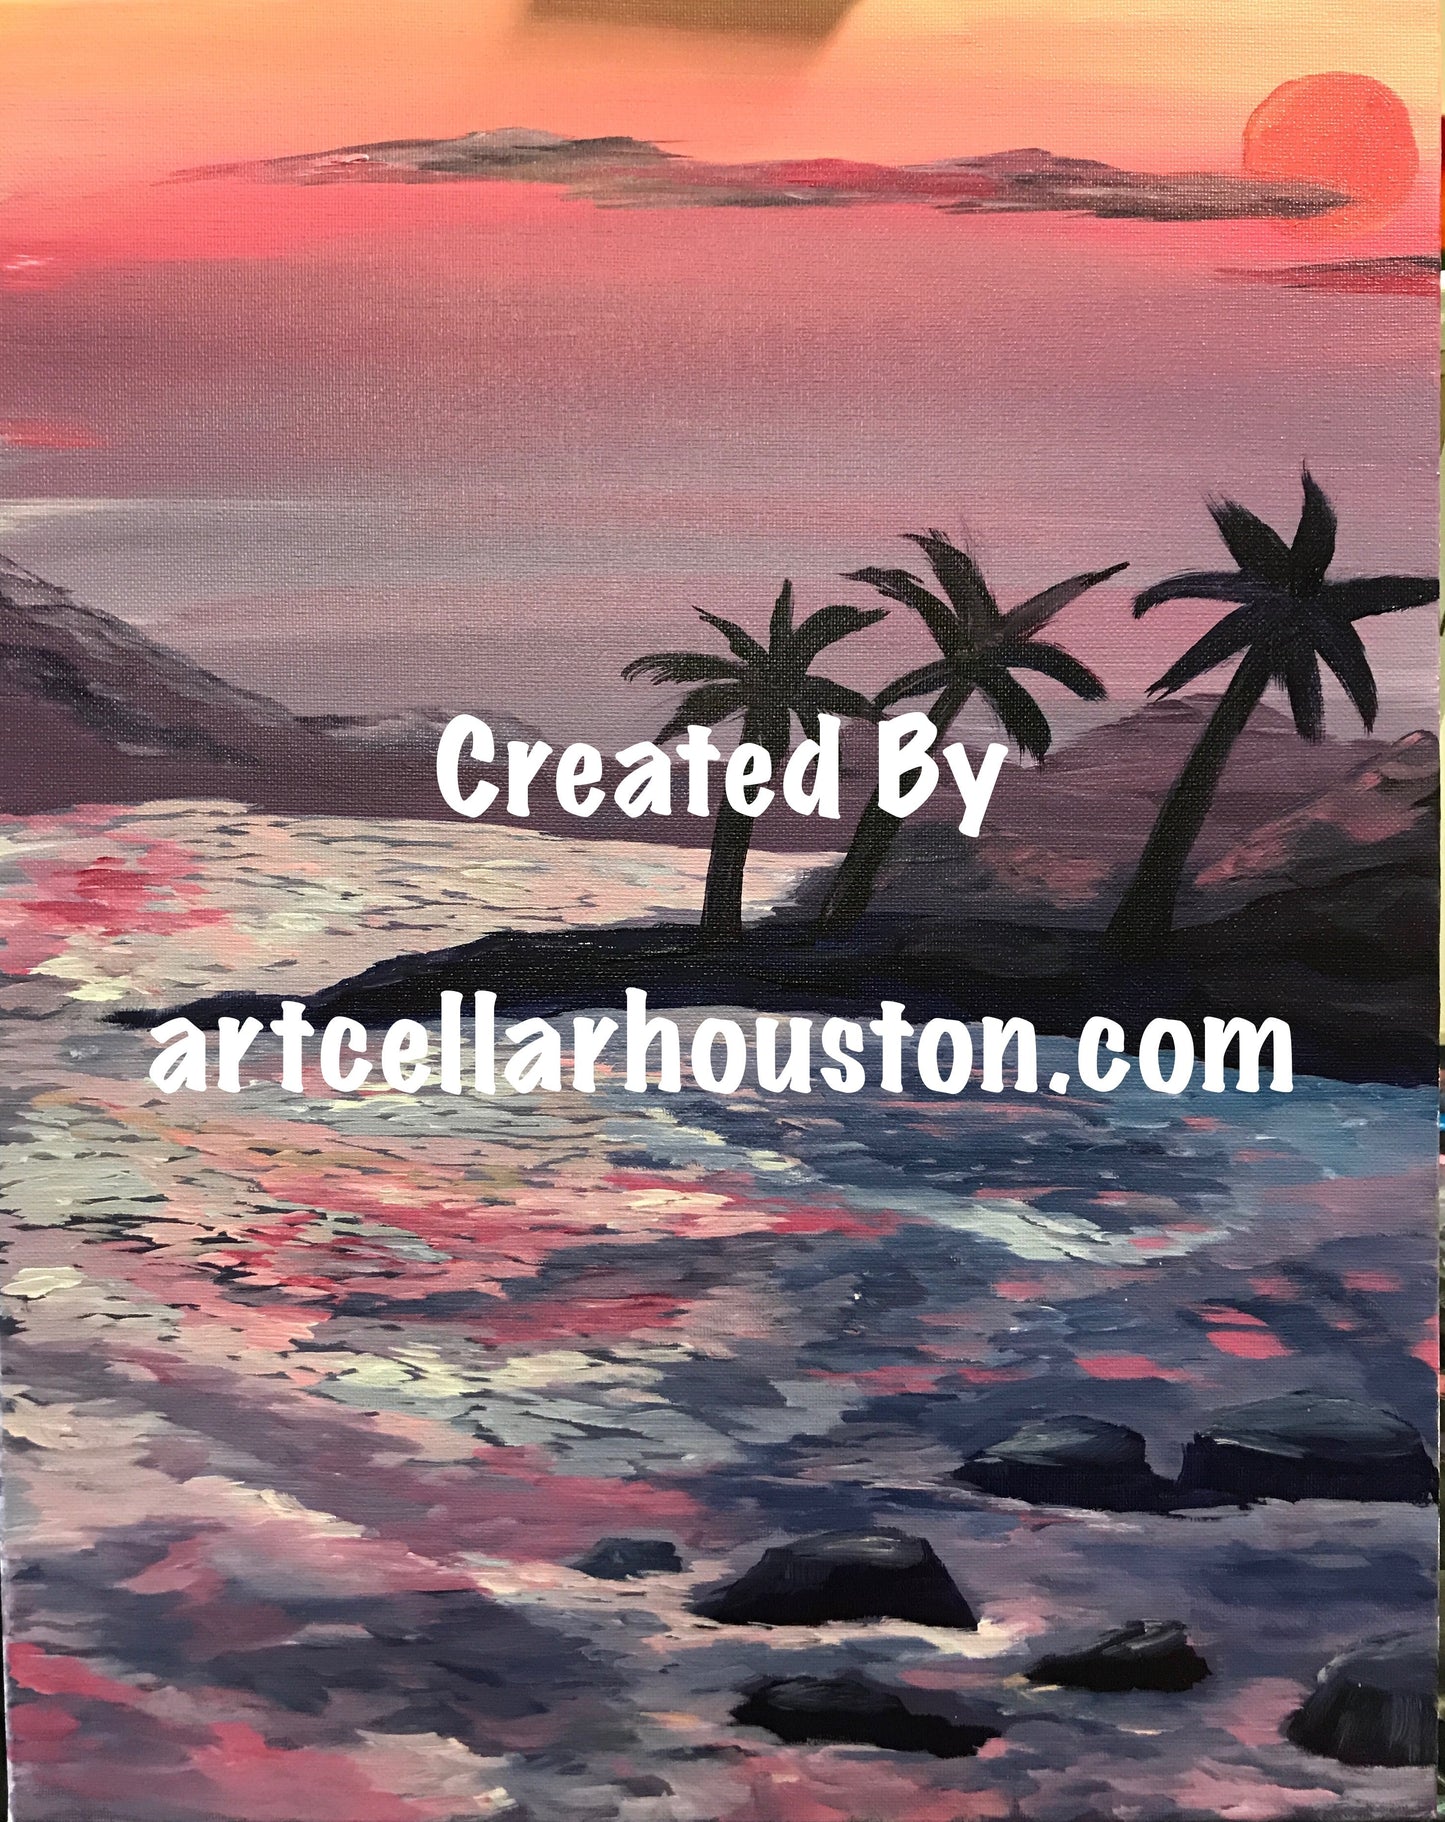 Sat, Aug 6th, 1-3P “Paradise Cove” Private Houston Kids Painting Party